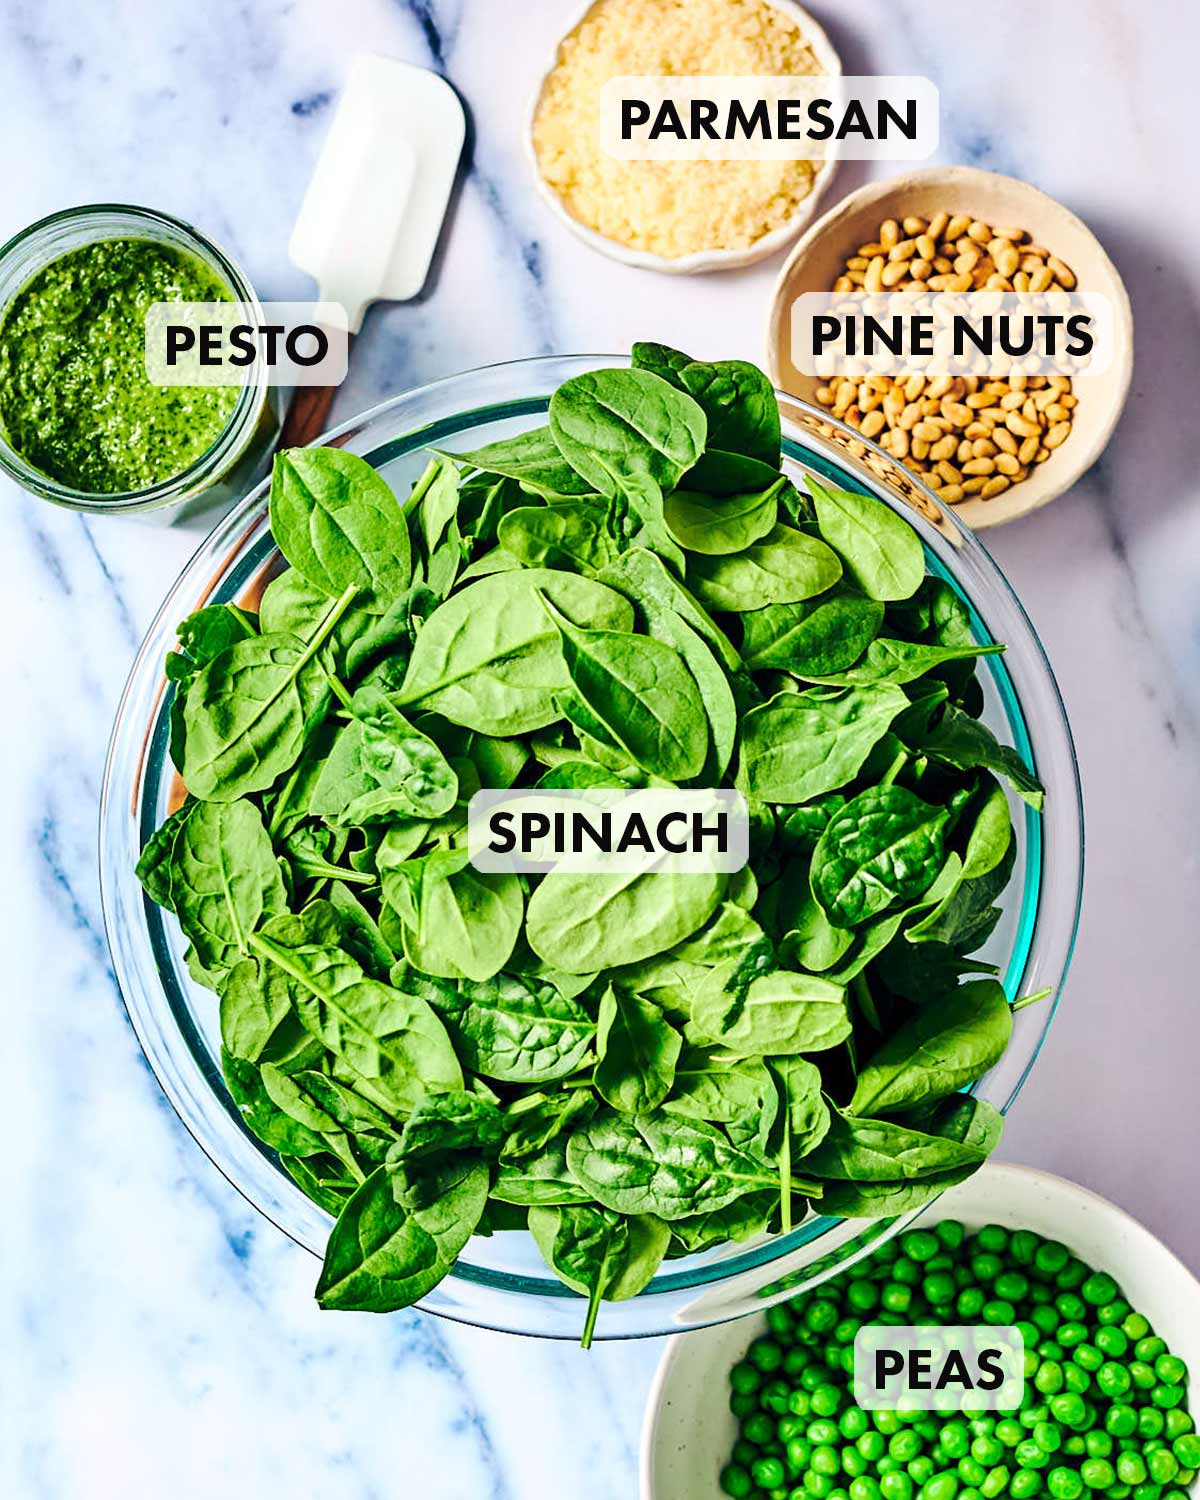 Ingredients to make Pea and Pesto Spinach Salad